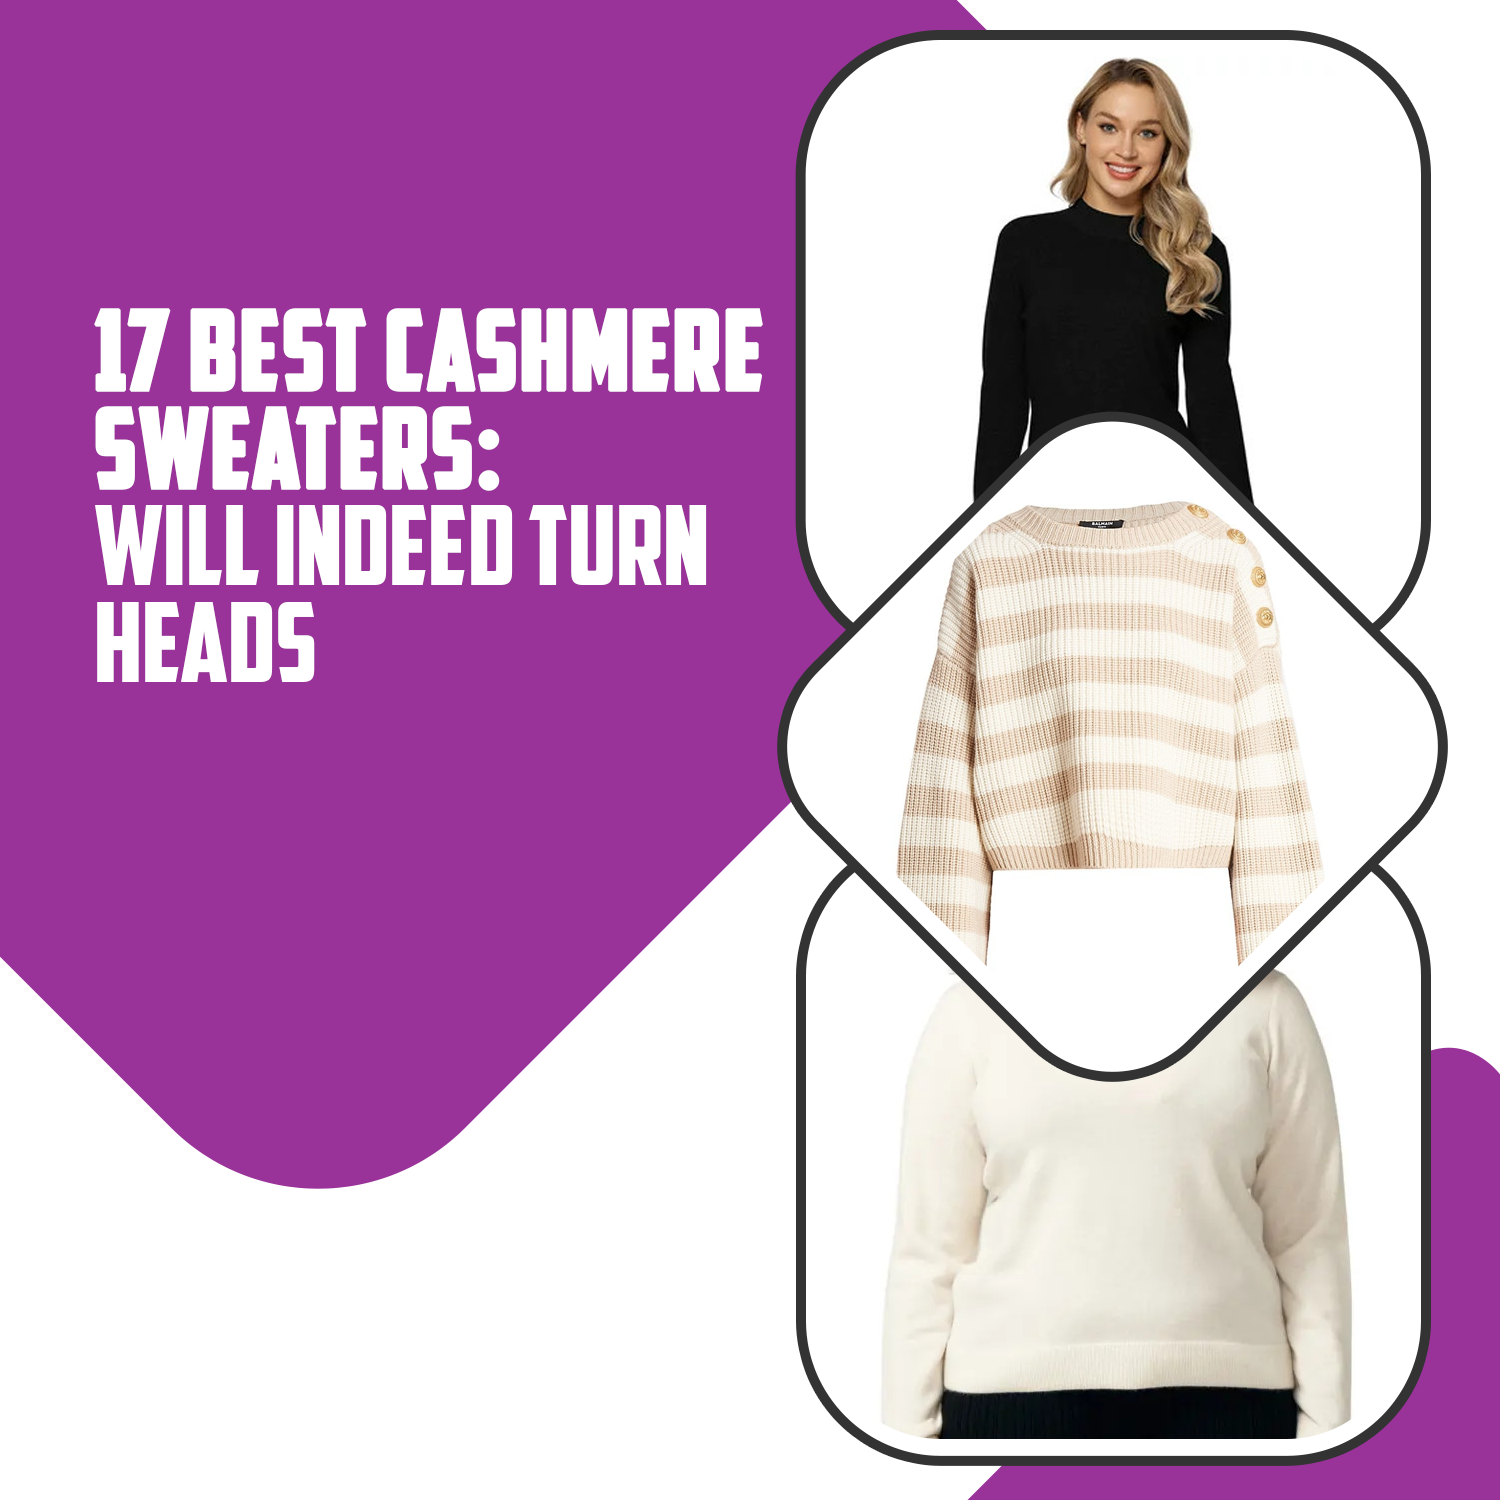 17 Best Cashmere Sweaters: Will Indeed Turn Heads